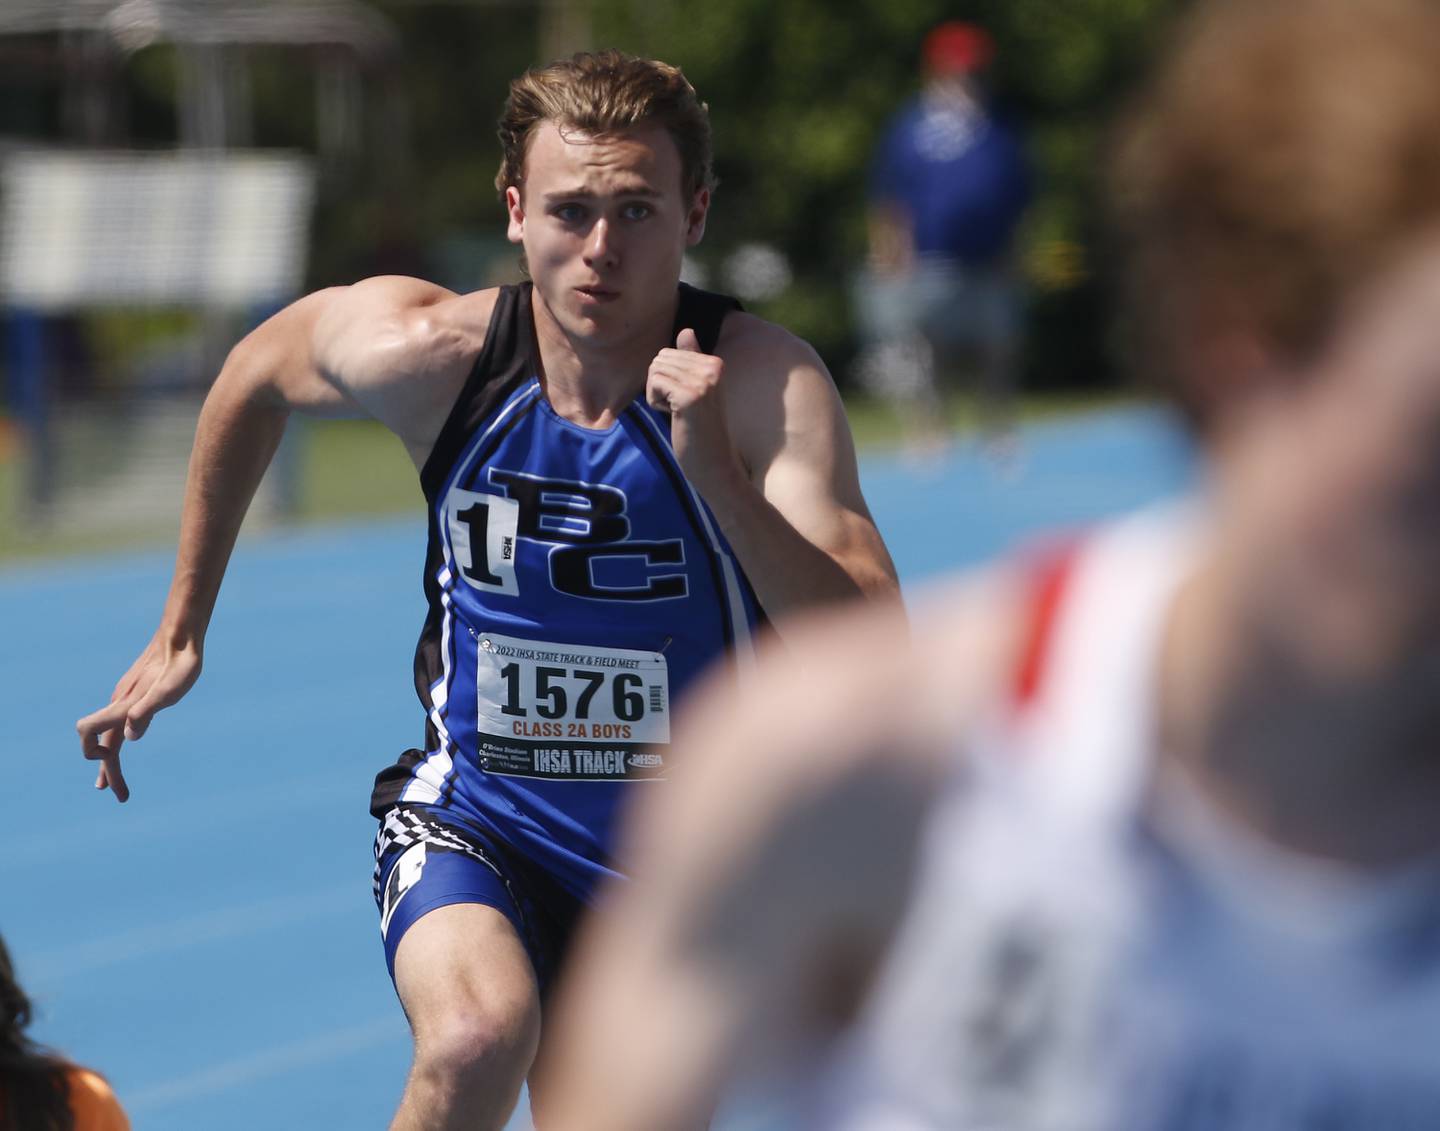 Burlington’s Zac Schmidt competes in the 400 meter dash during the IHSA Class 2A State Track and Field Championships Saturday, May 28, 2022, at Eastern Illinois University in Charleston.